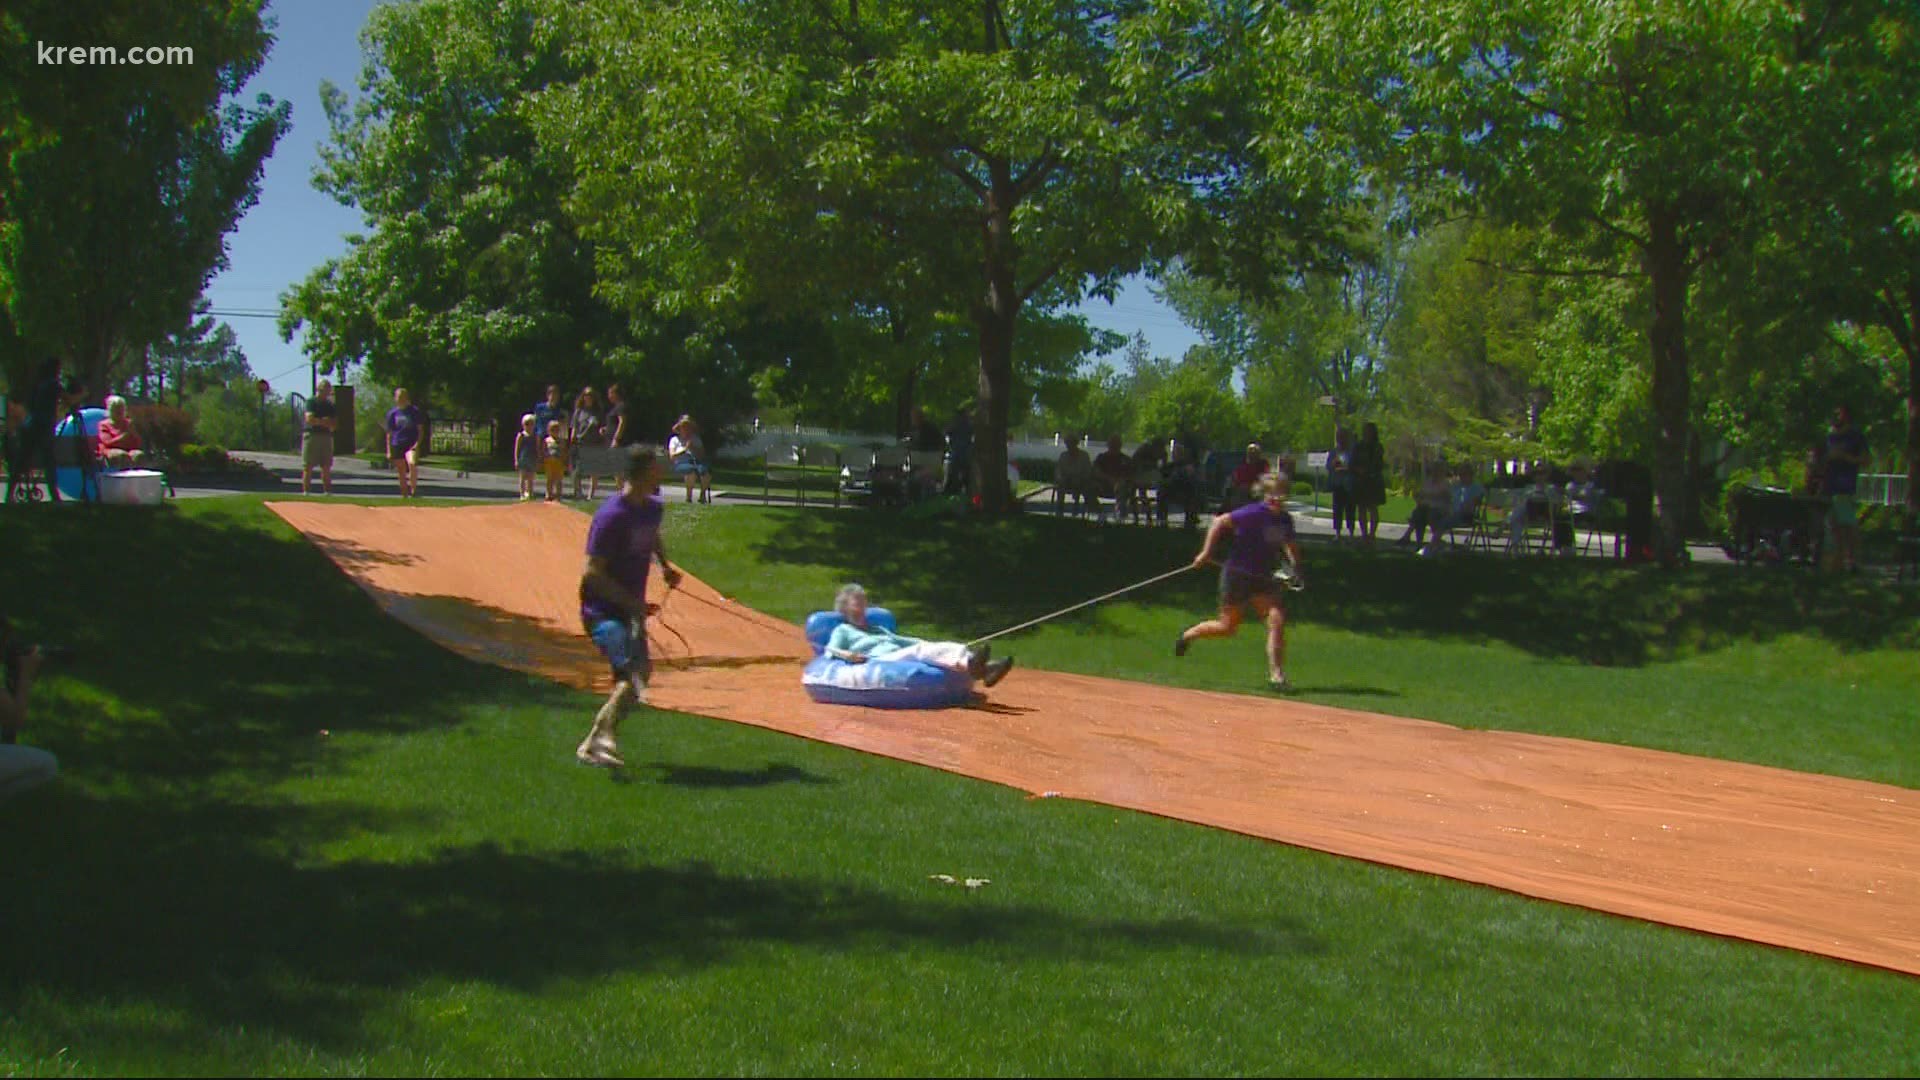 The fun in the sun was also an opportunity to raise awareness for Alzheimer's.